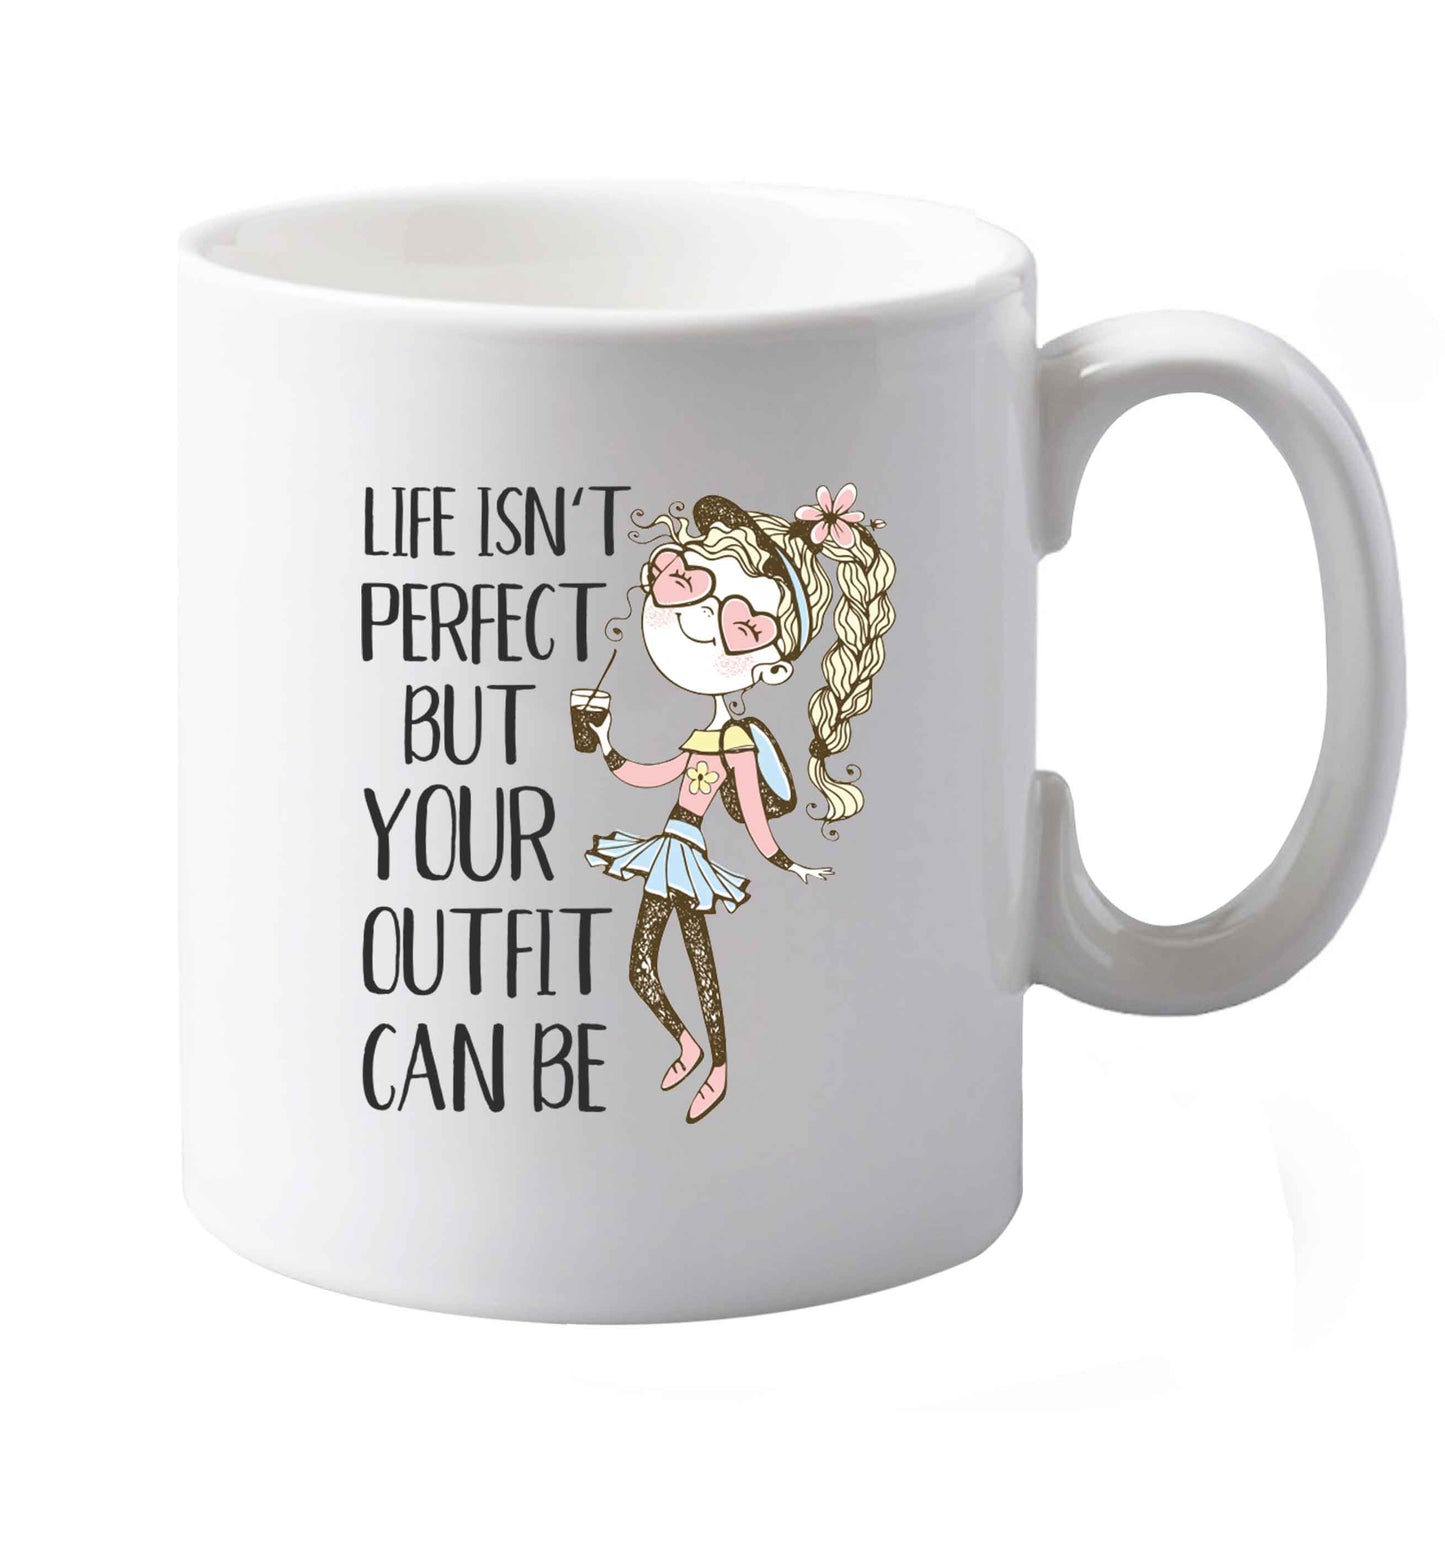 10 oz Life isn't perfect but your outfit can be illustration  ceramic mug both sides